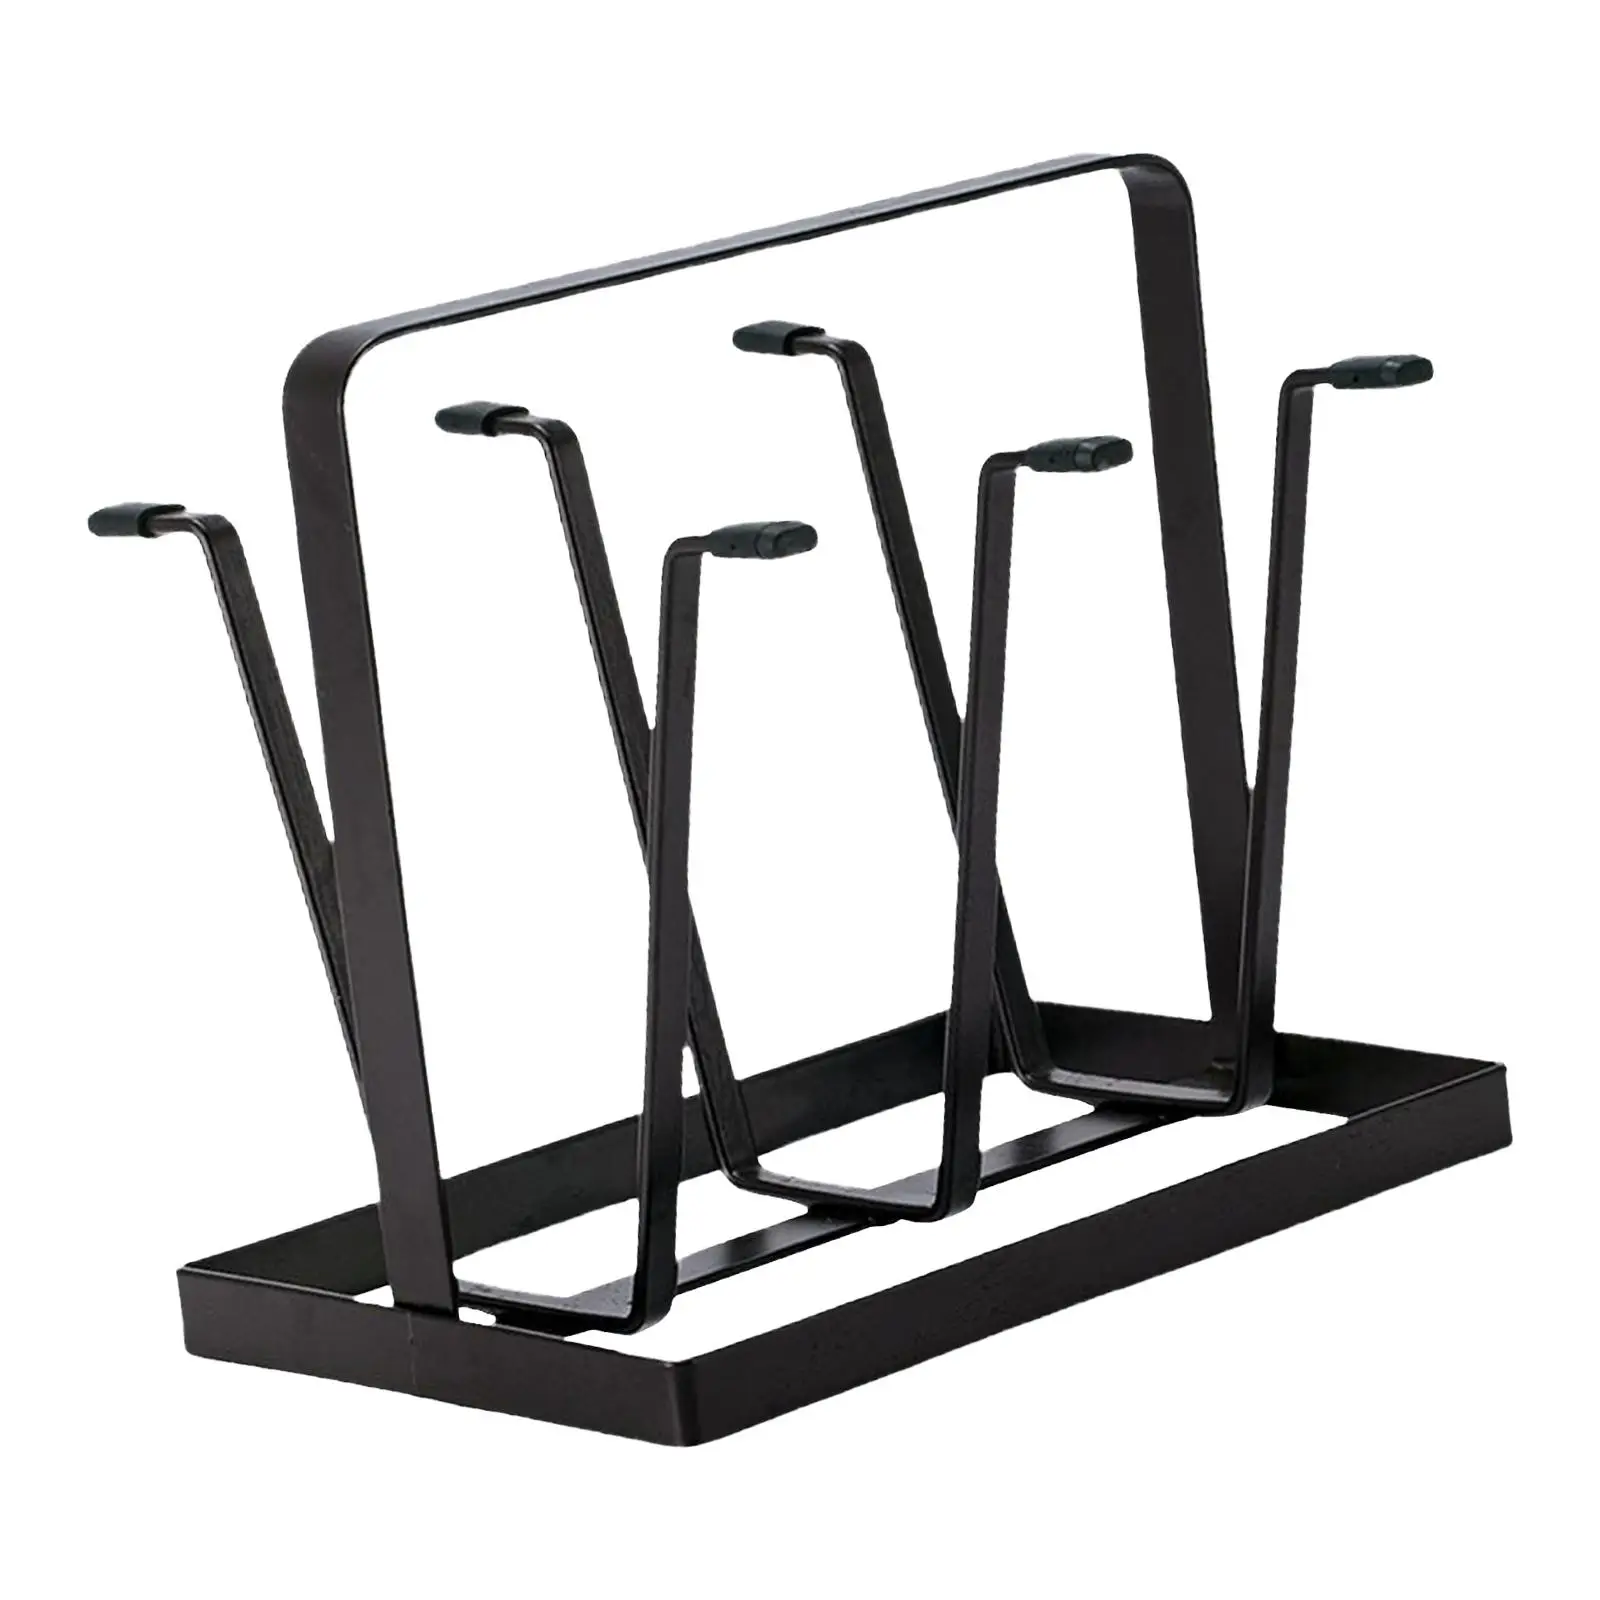 Counter Top Metal Cups Drying Rack Hanger Stand 6 Hook Organizer Sturdy